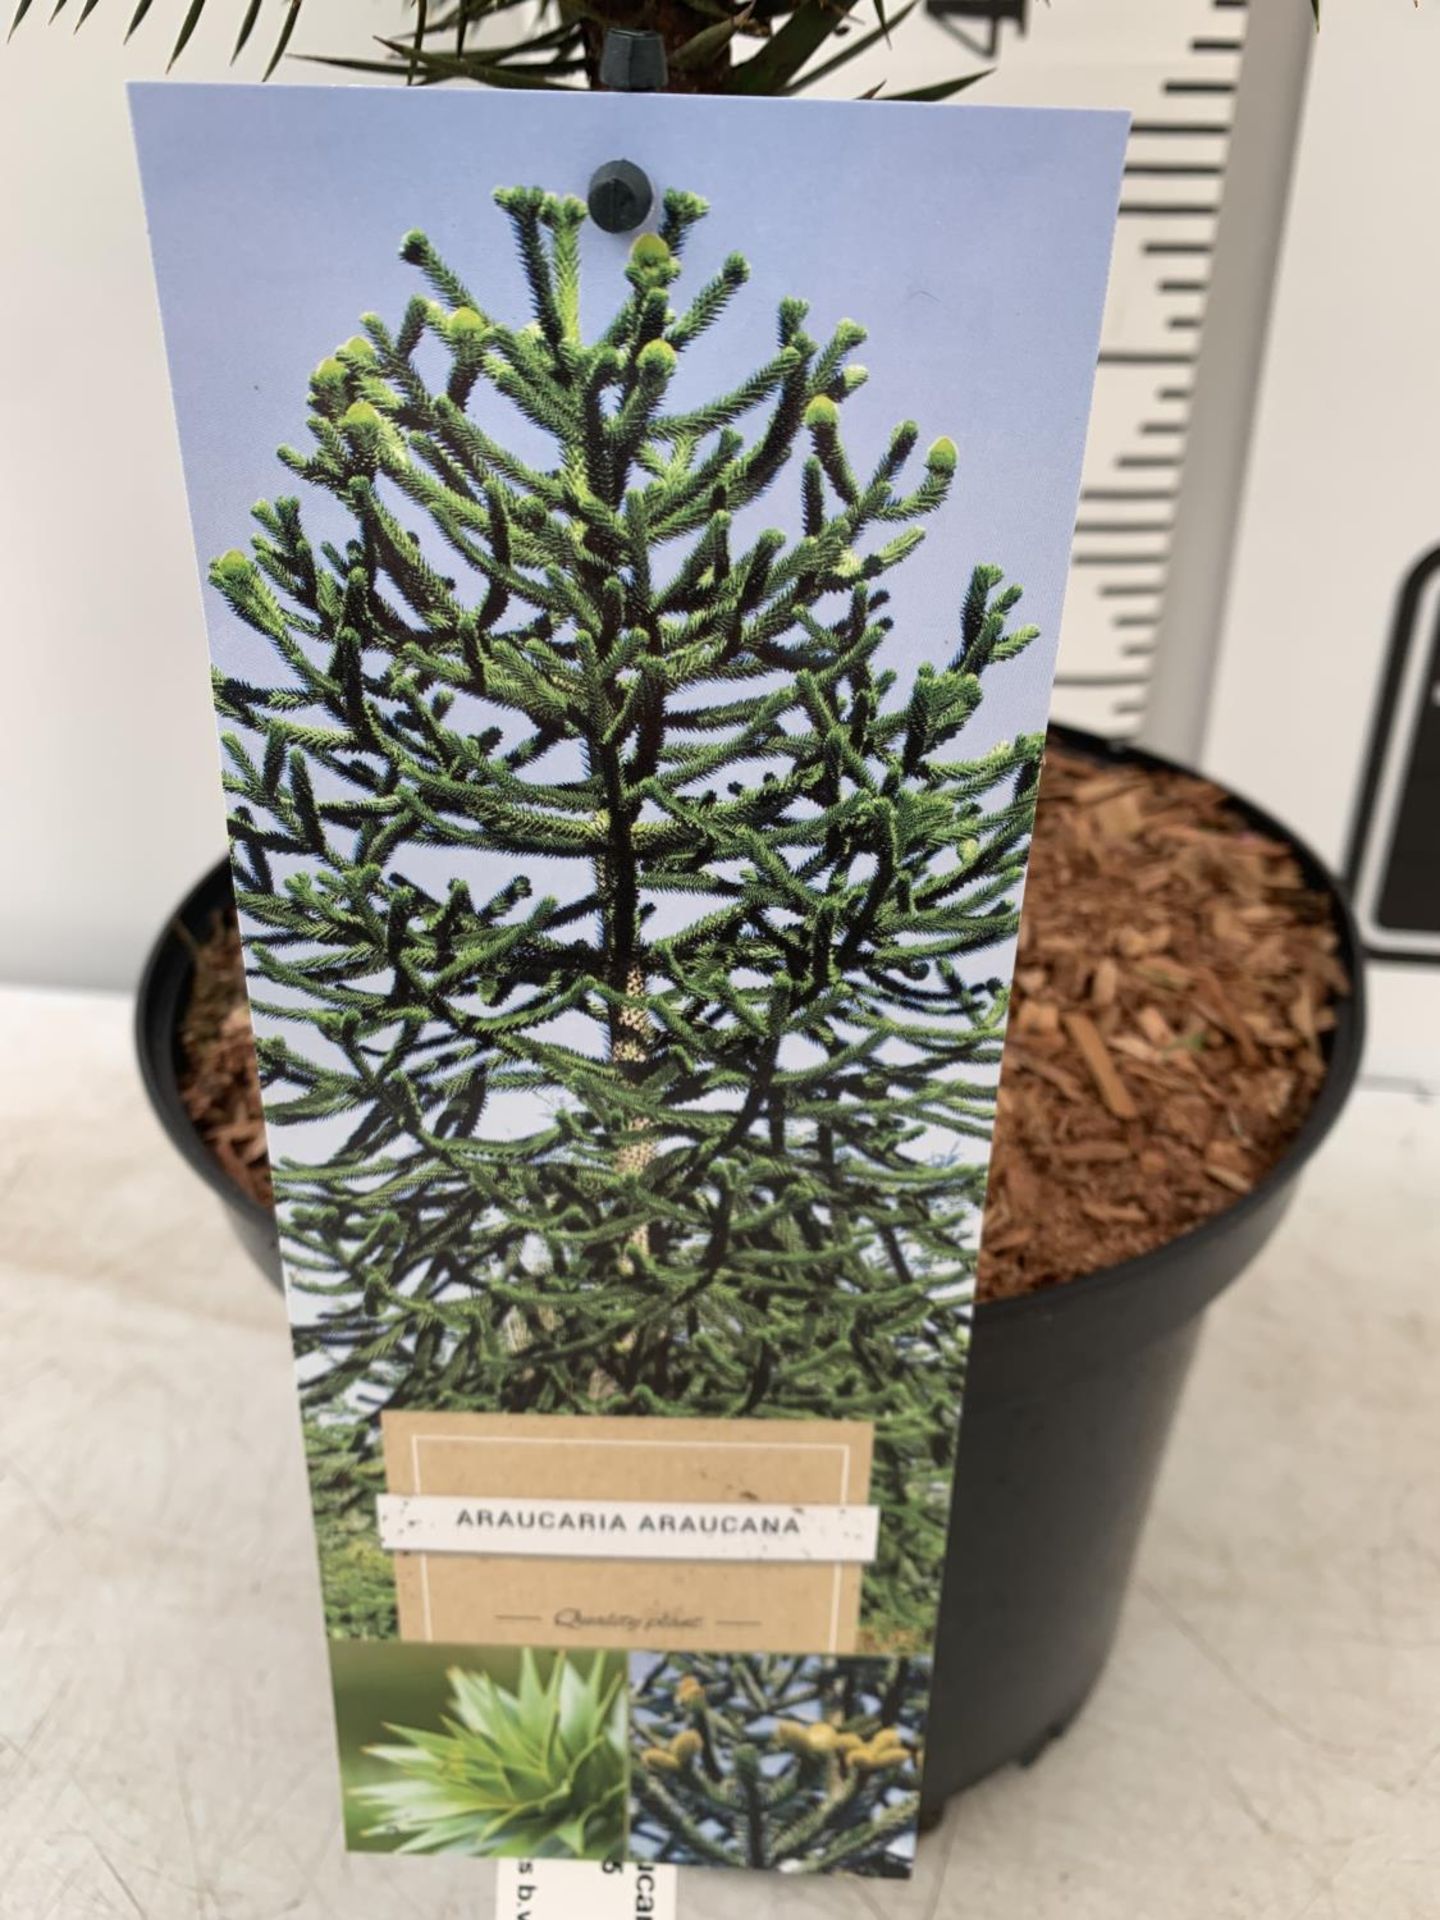 ONE MONKEY PUZZLE TREE ARAUCARIA ARAUCANA APPROX 70CM IN HEIGHT IN A 5 LTR POT PLUS VAT - Image 4 of 5